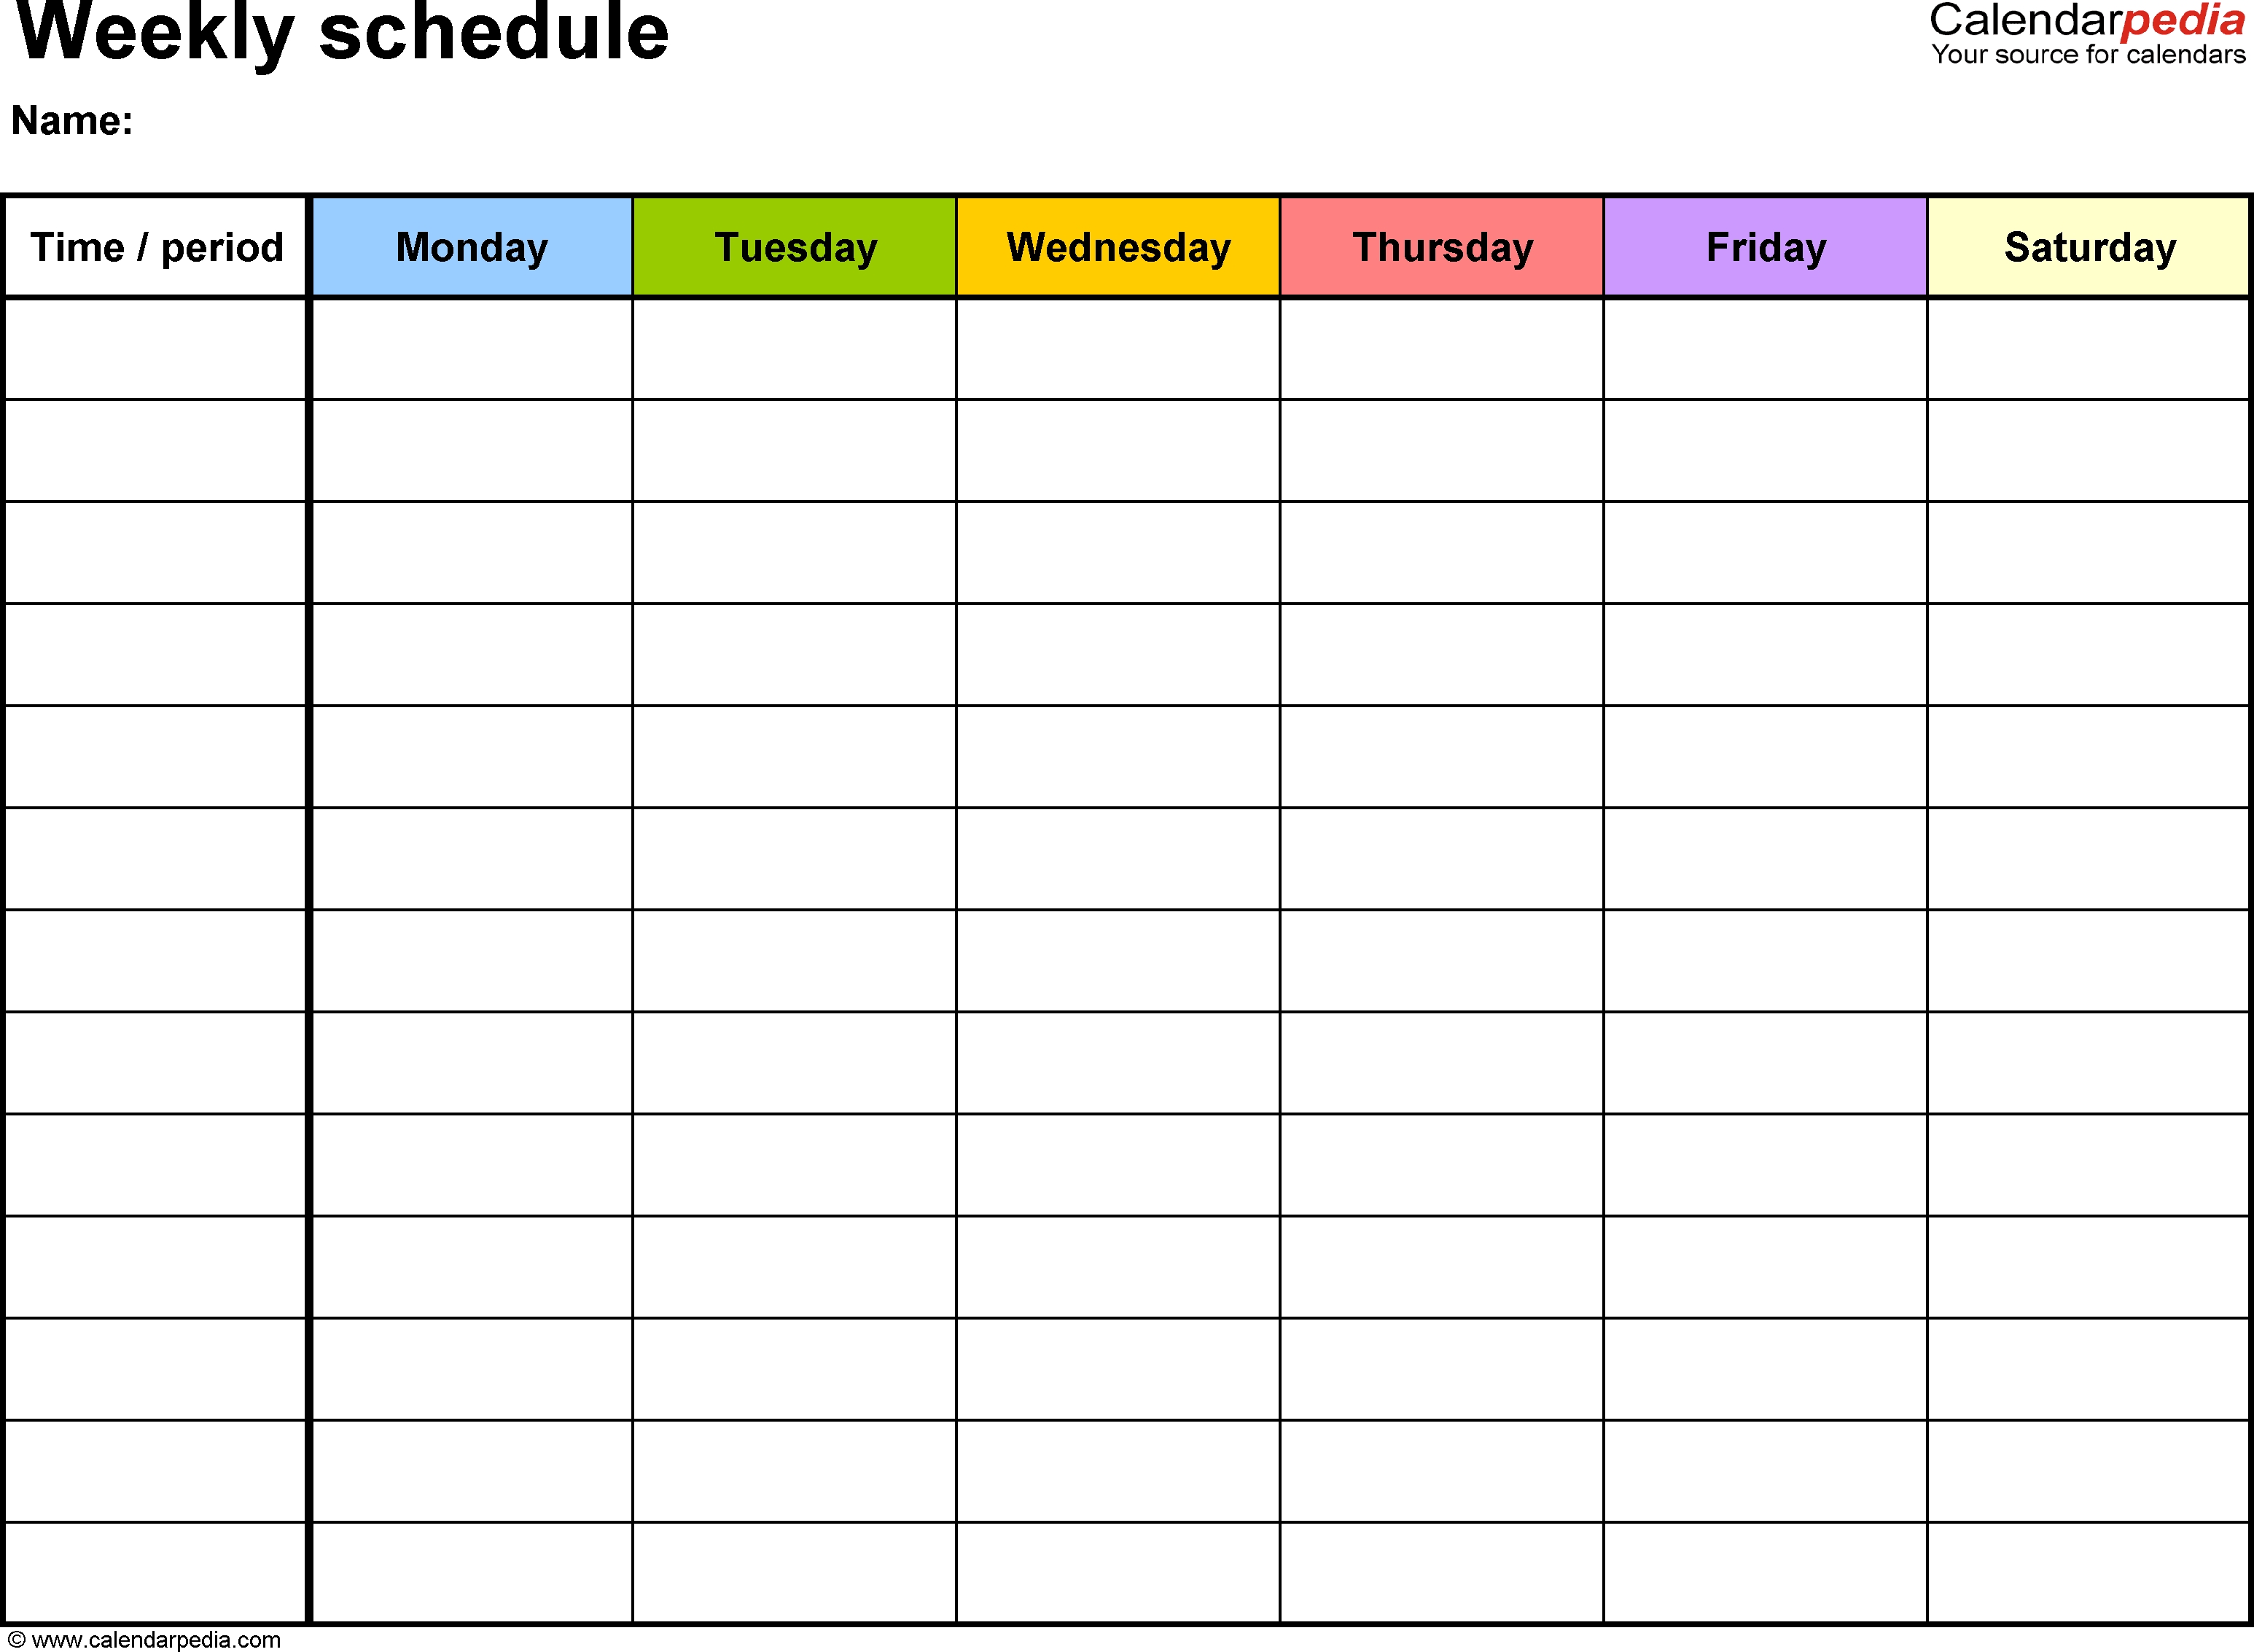 Free Weekly Schedule Templates For Word - 18 Templates within Monday Through Friday Weekly Calendar